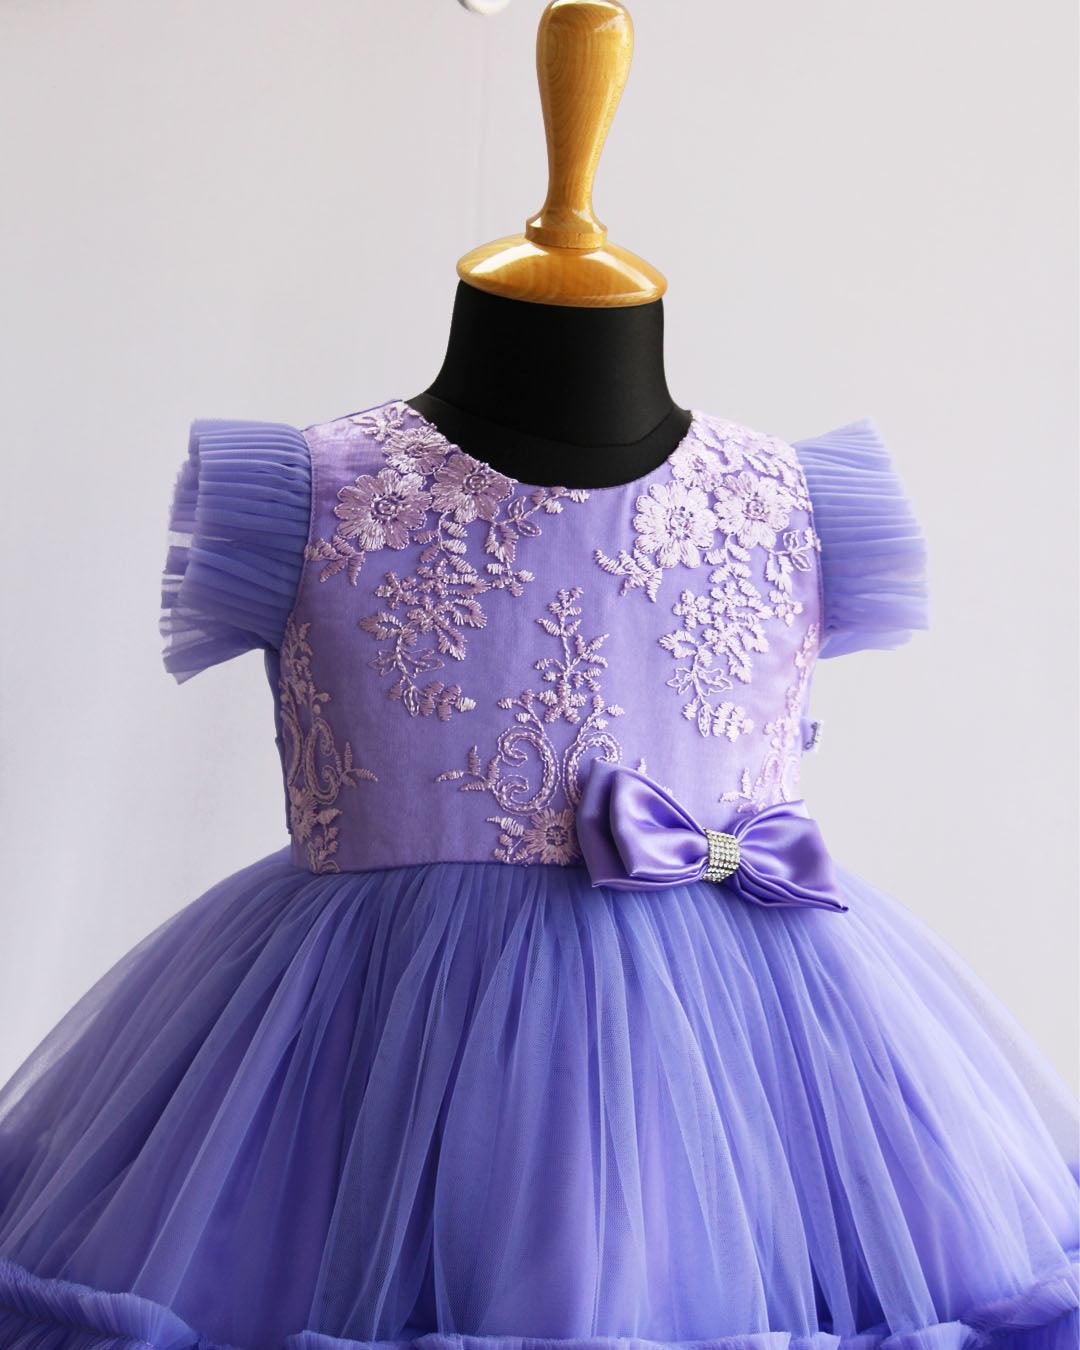 Lavender Shade Pleated Thread Embroidery Bow Frock
Material: : Lavender Shade Pleated Embroidery Bow Frock is made with soft mono nylon net fabrics with ruffled bottom. Heavy thread embroidered fabric is given in th